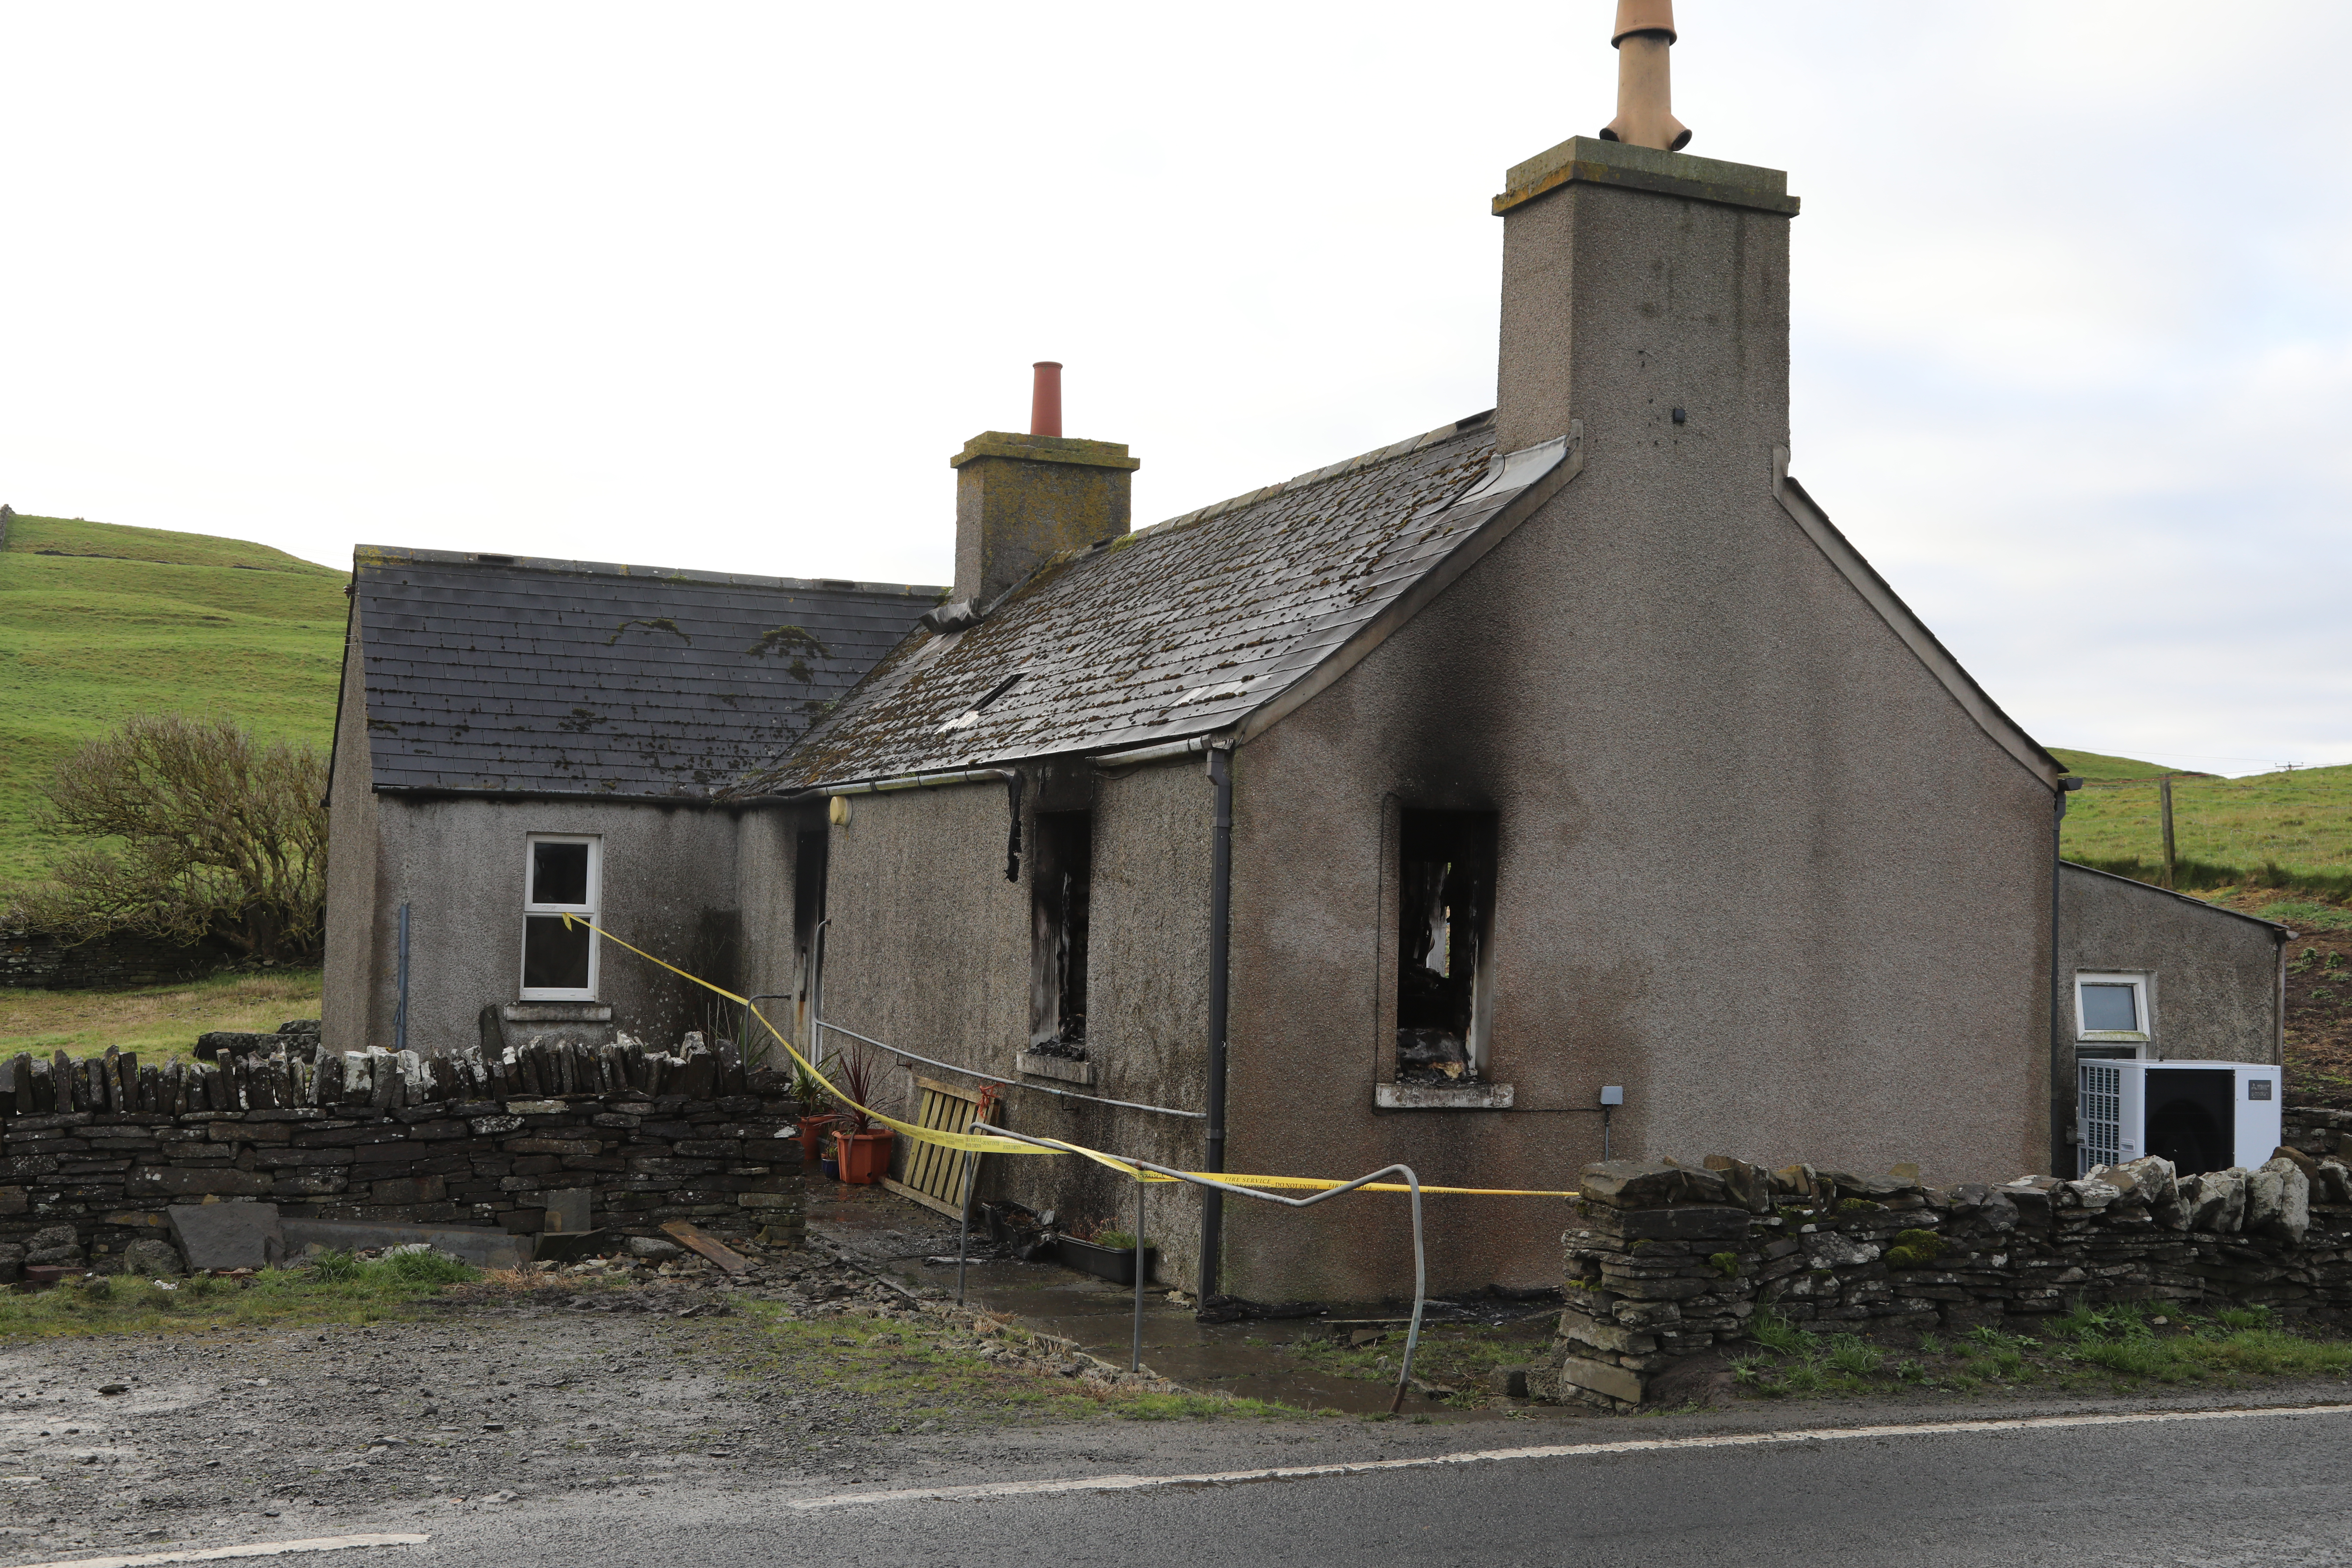 The burnt out cottage belonging to Binscarth farm, Finstown.